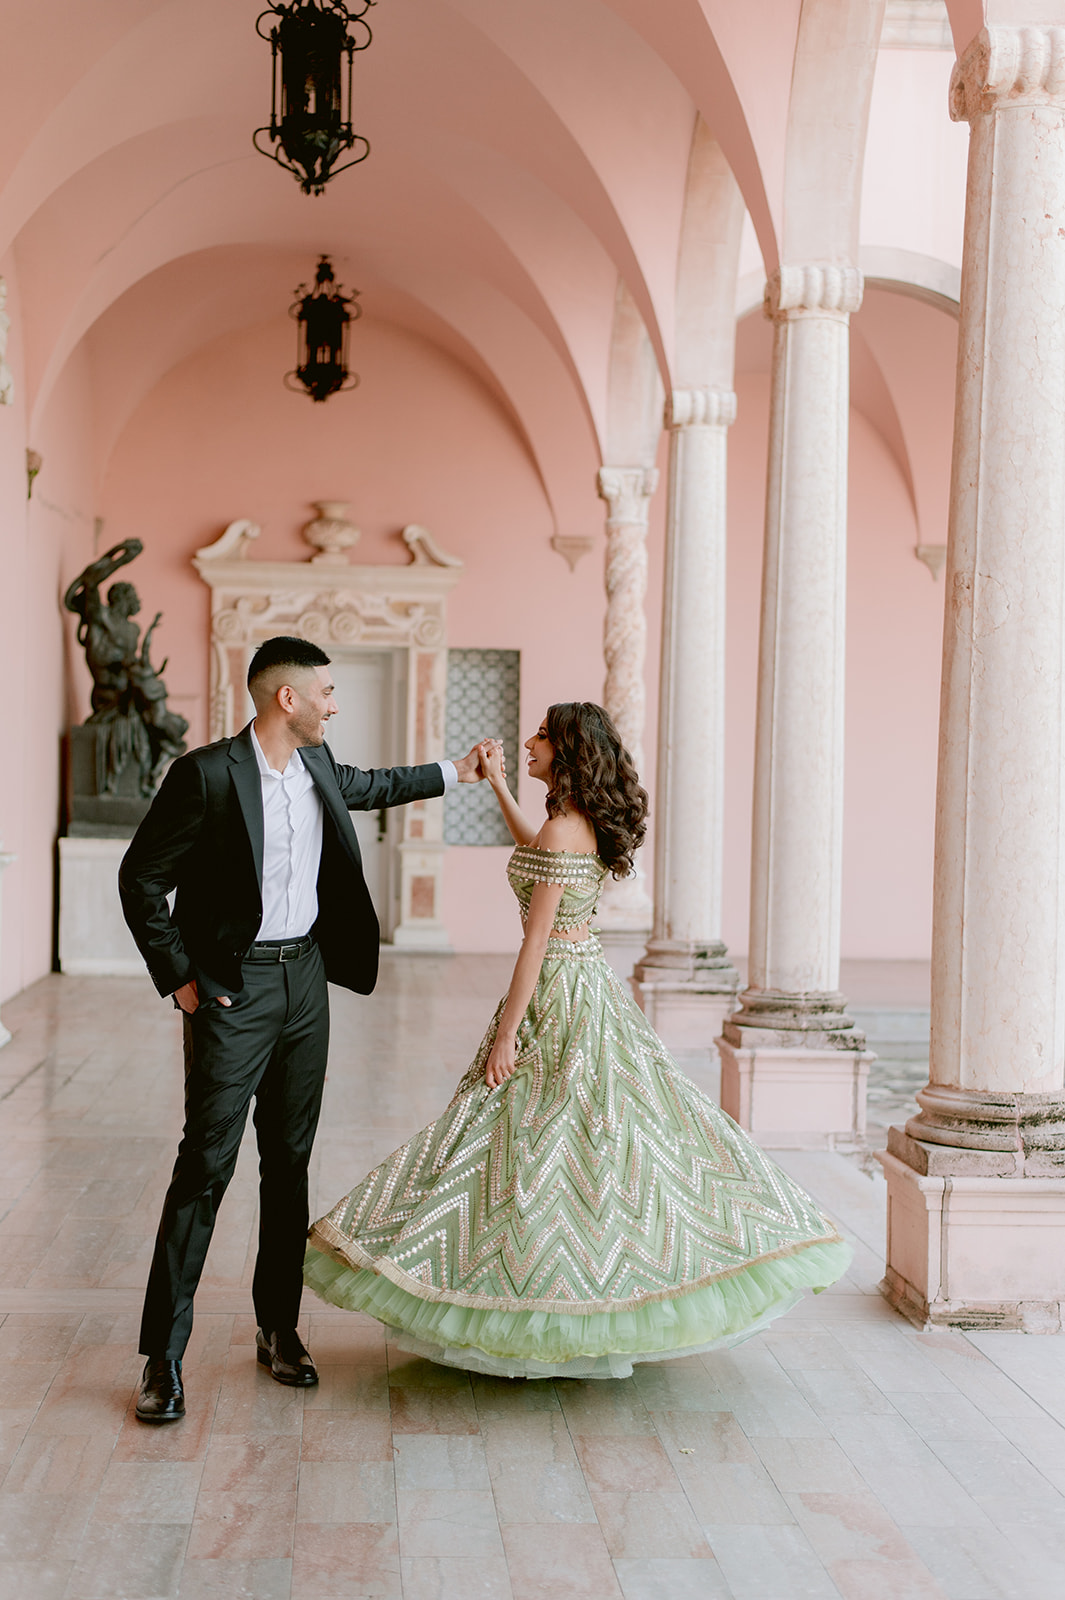 "Stunning portrait of Indian bride and groom in front of Ca' d'Zan mansion"
